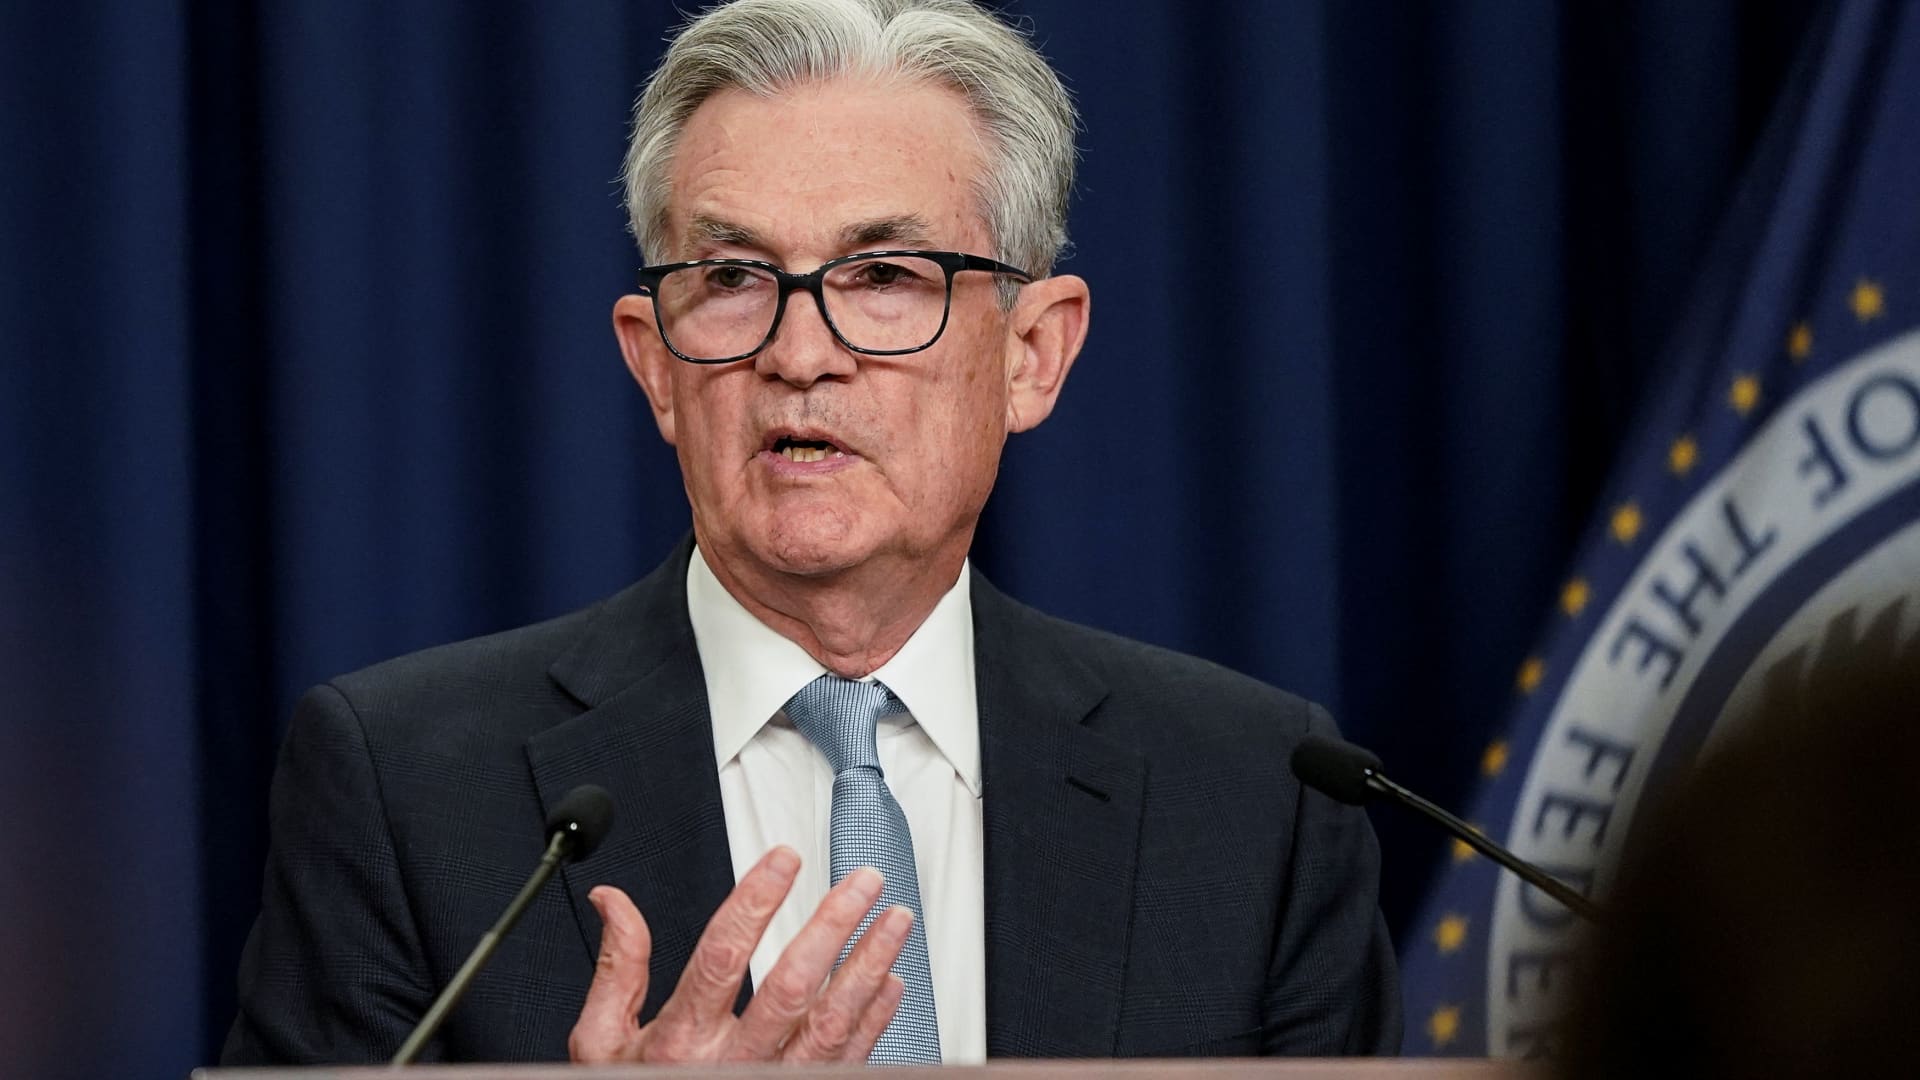 A day after Powell’s assurances about the economy, markets are worried that ‘the..